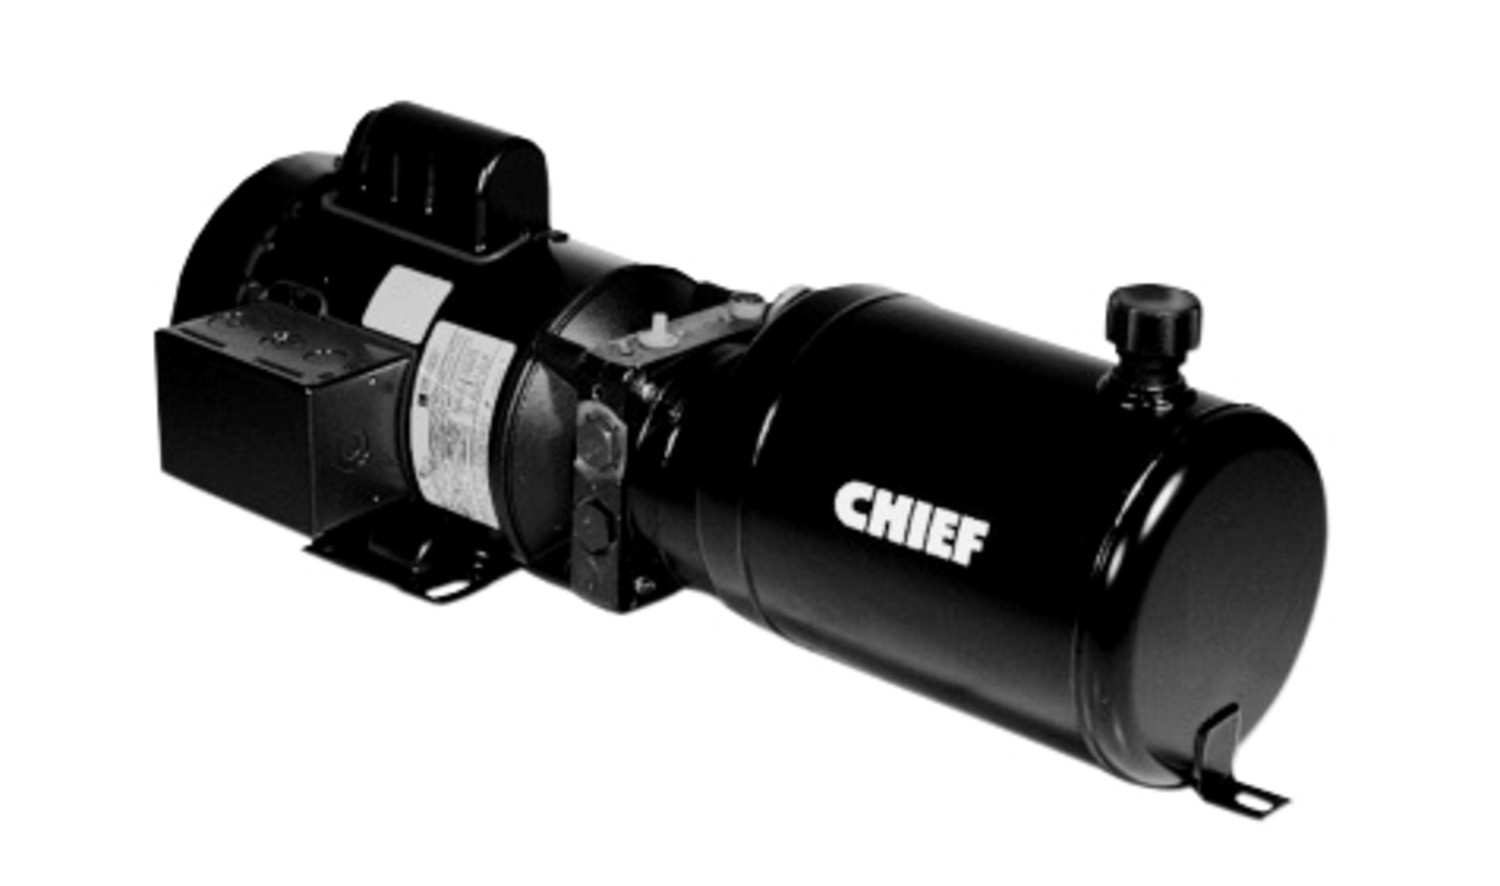 CHIEF AP AC POWER UNIT: 0.5 HP, 0.49 GPM, 1450 PSI, PUMPING STATION W/ADJ. RELIEF